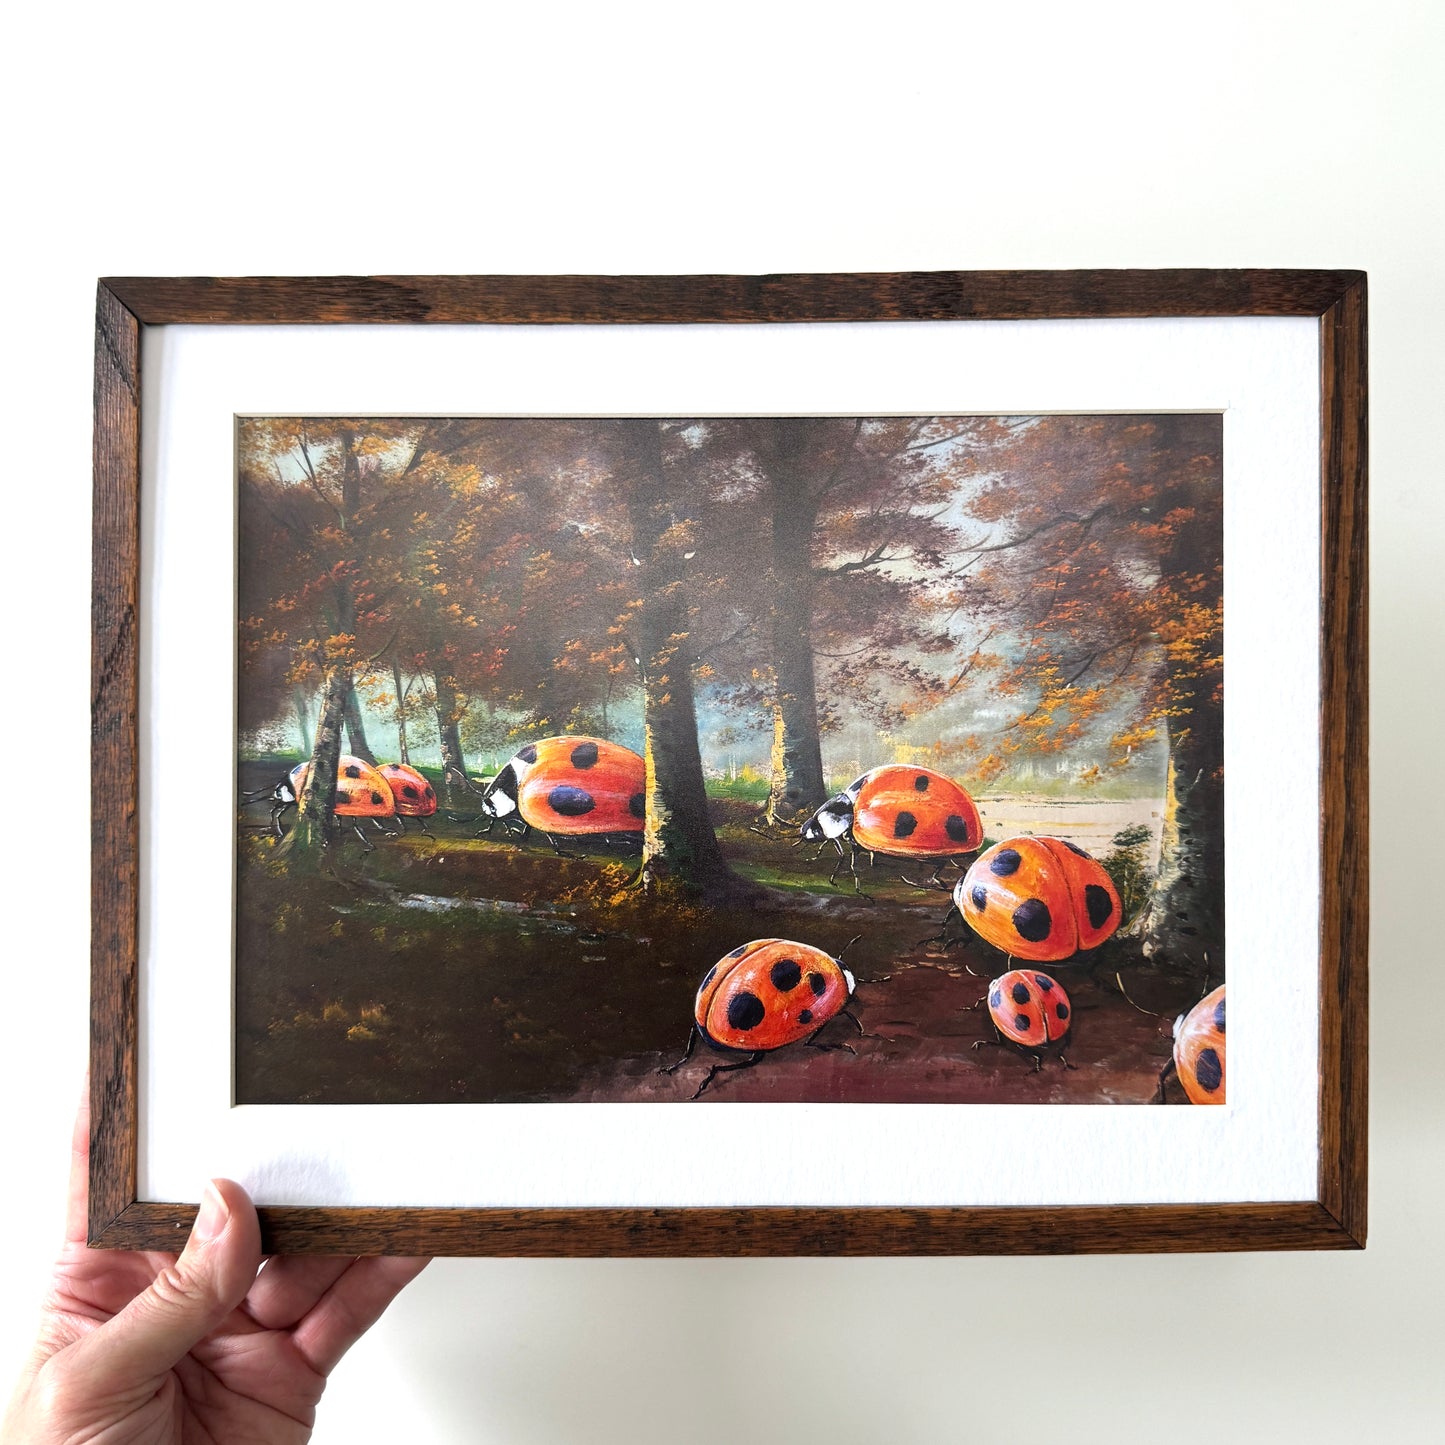 Into The Woods - PRINT in antique wood frame